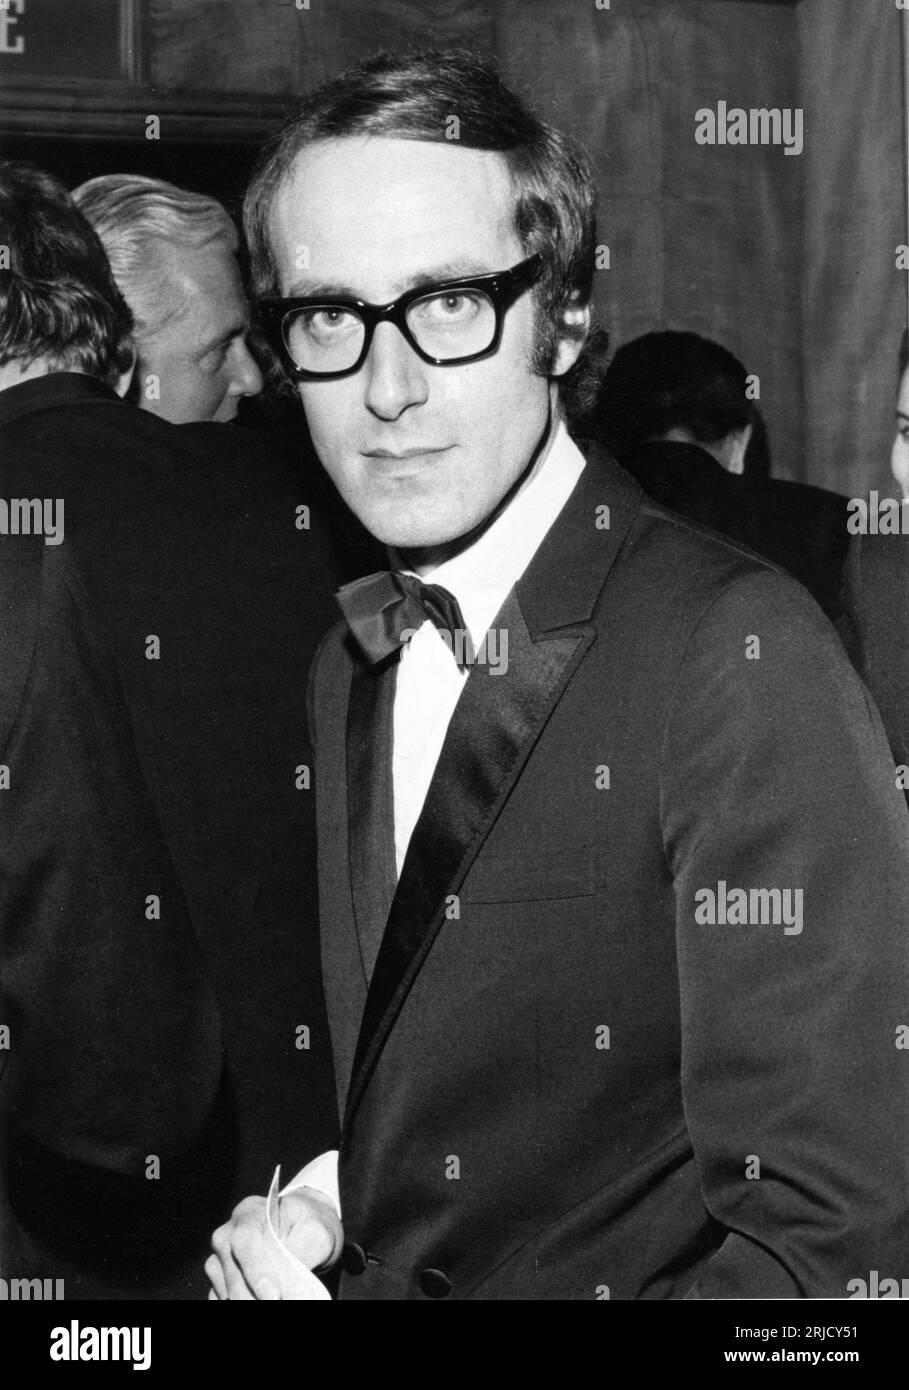 Film Composer JOHN BARRY candid at the World Premiere of CASINO ROYALE (Famous Artists Productions / Columbia Pictures) at the Odeon Leicester Square on April 13th 1967 from P.I.C. Photos Ltd. 280 Uxbridge Road, London W12 Stock Photo